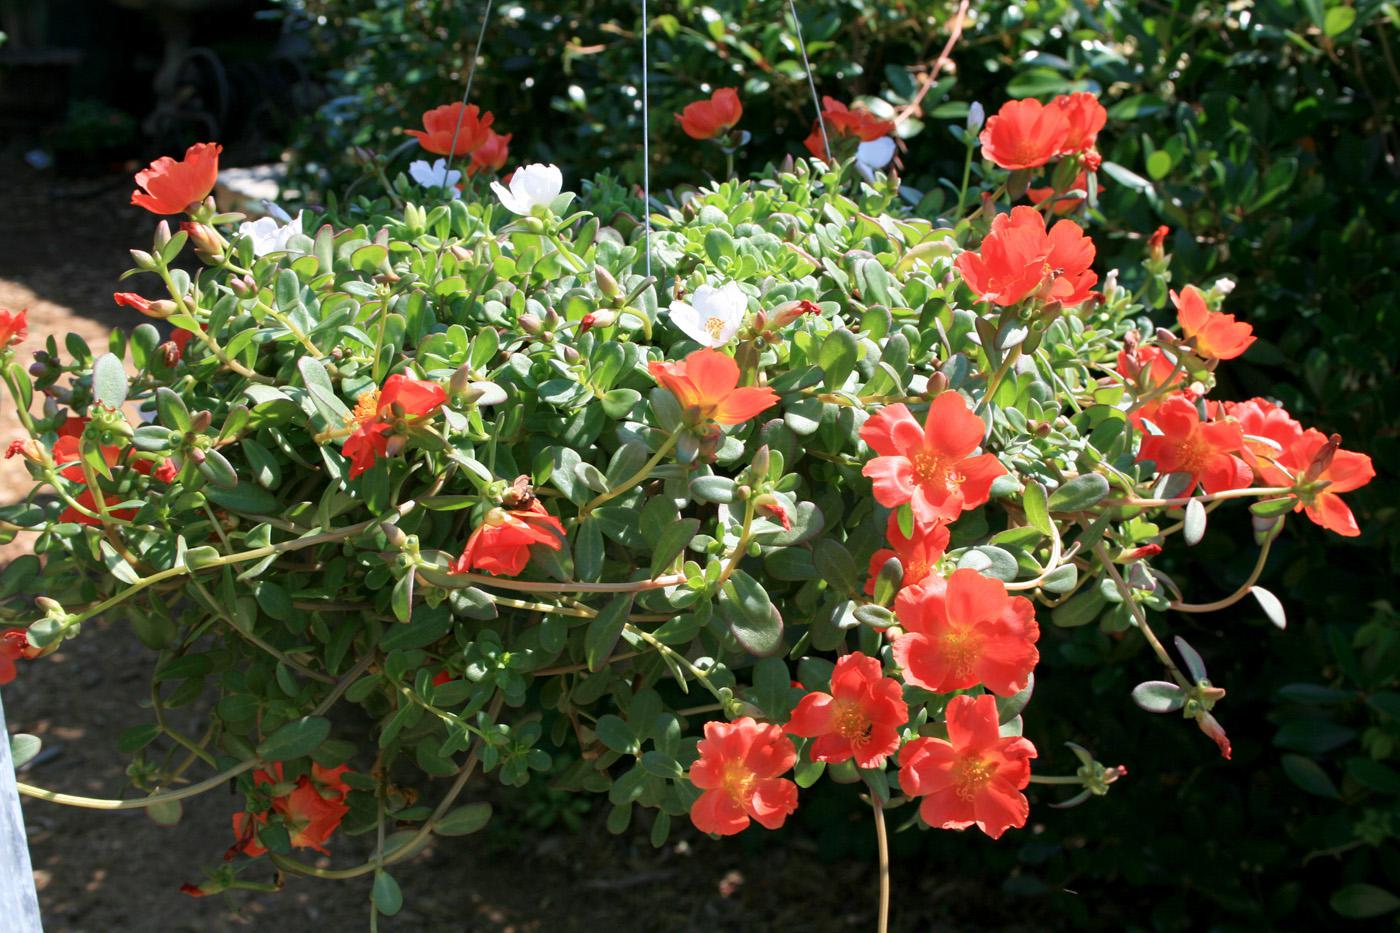 New varieties of purslane give this old plant new uses in the landscape. This hanging basket of Rio Scarlet and Rio White takes advantage of purslane's spreading and trailing characteristics and its ability to thrive in high summer temperatures. (Photo by Gary Bachman)